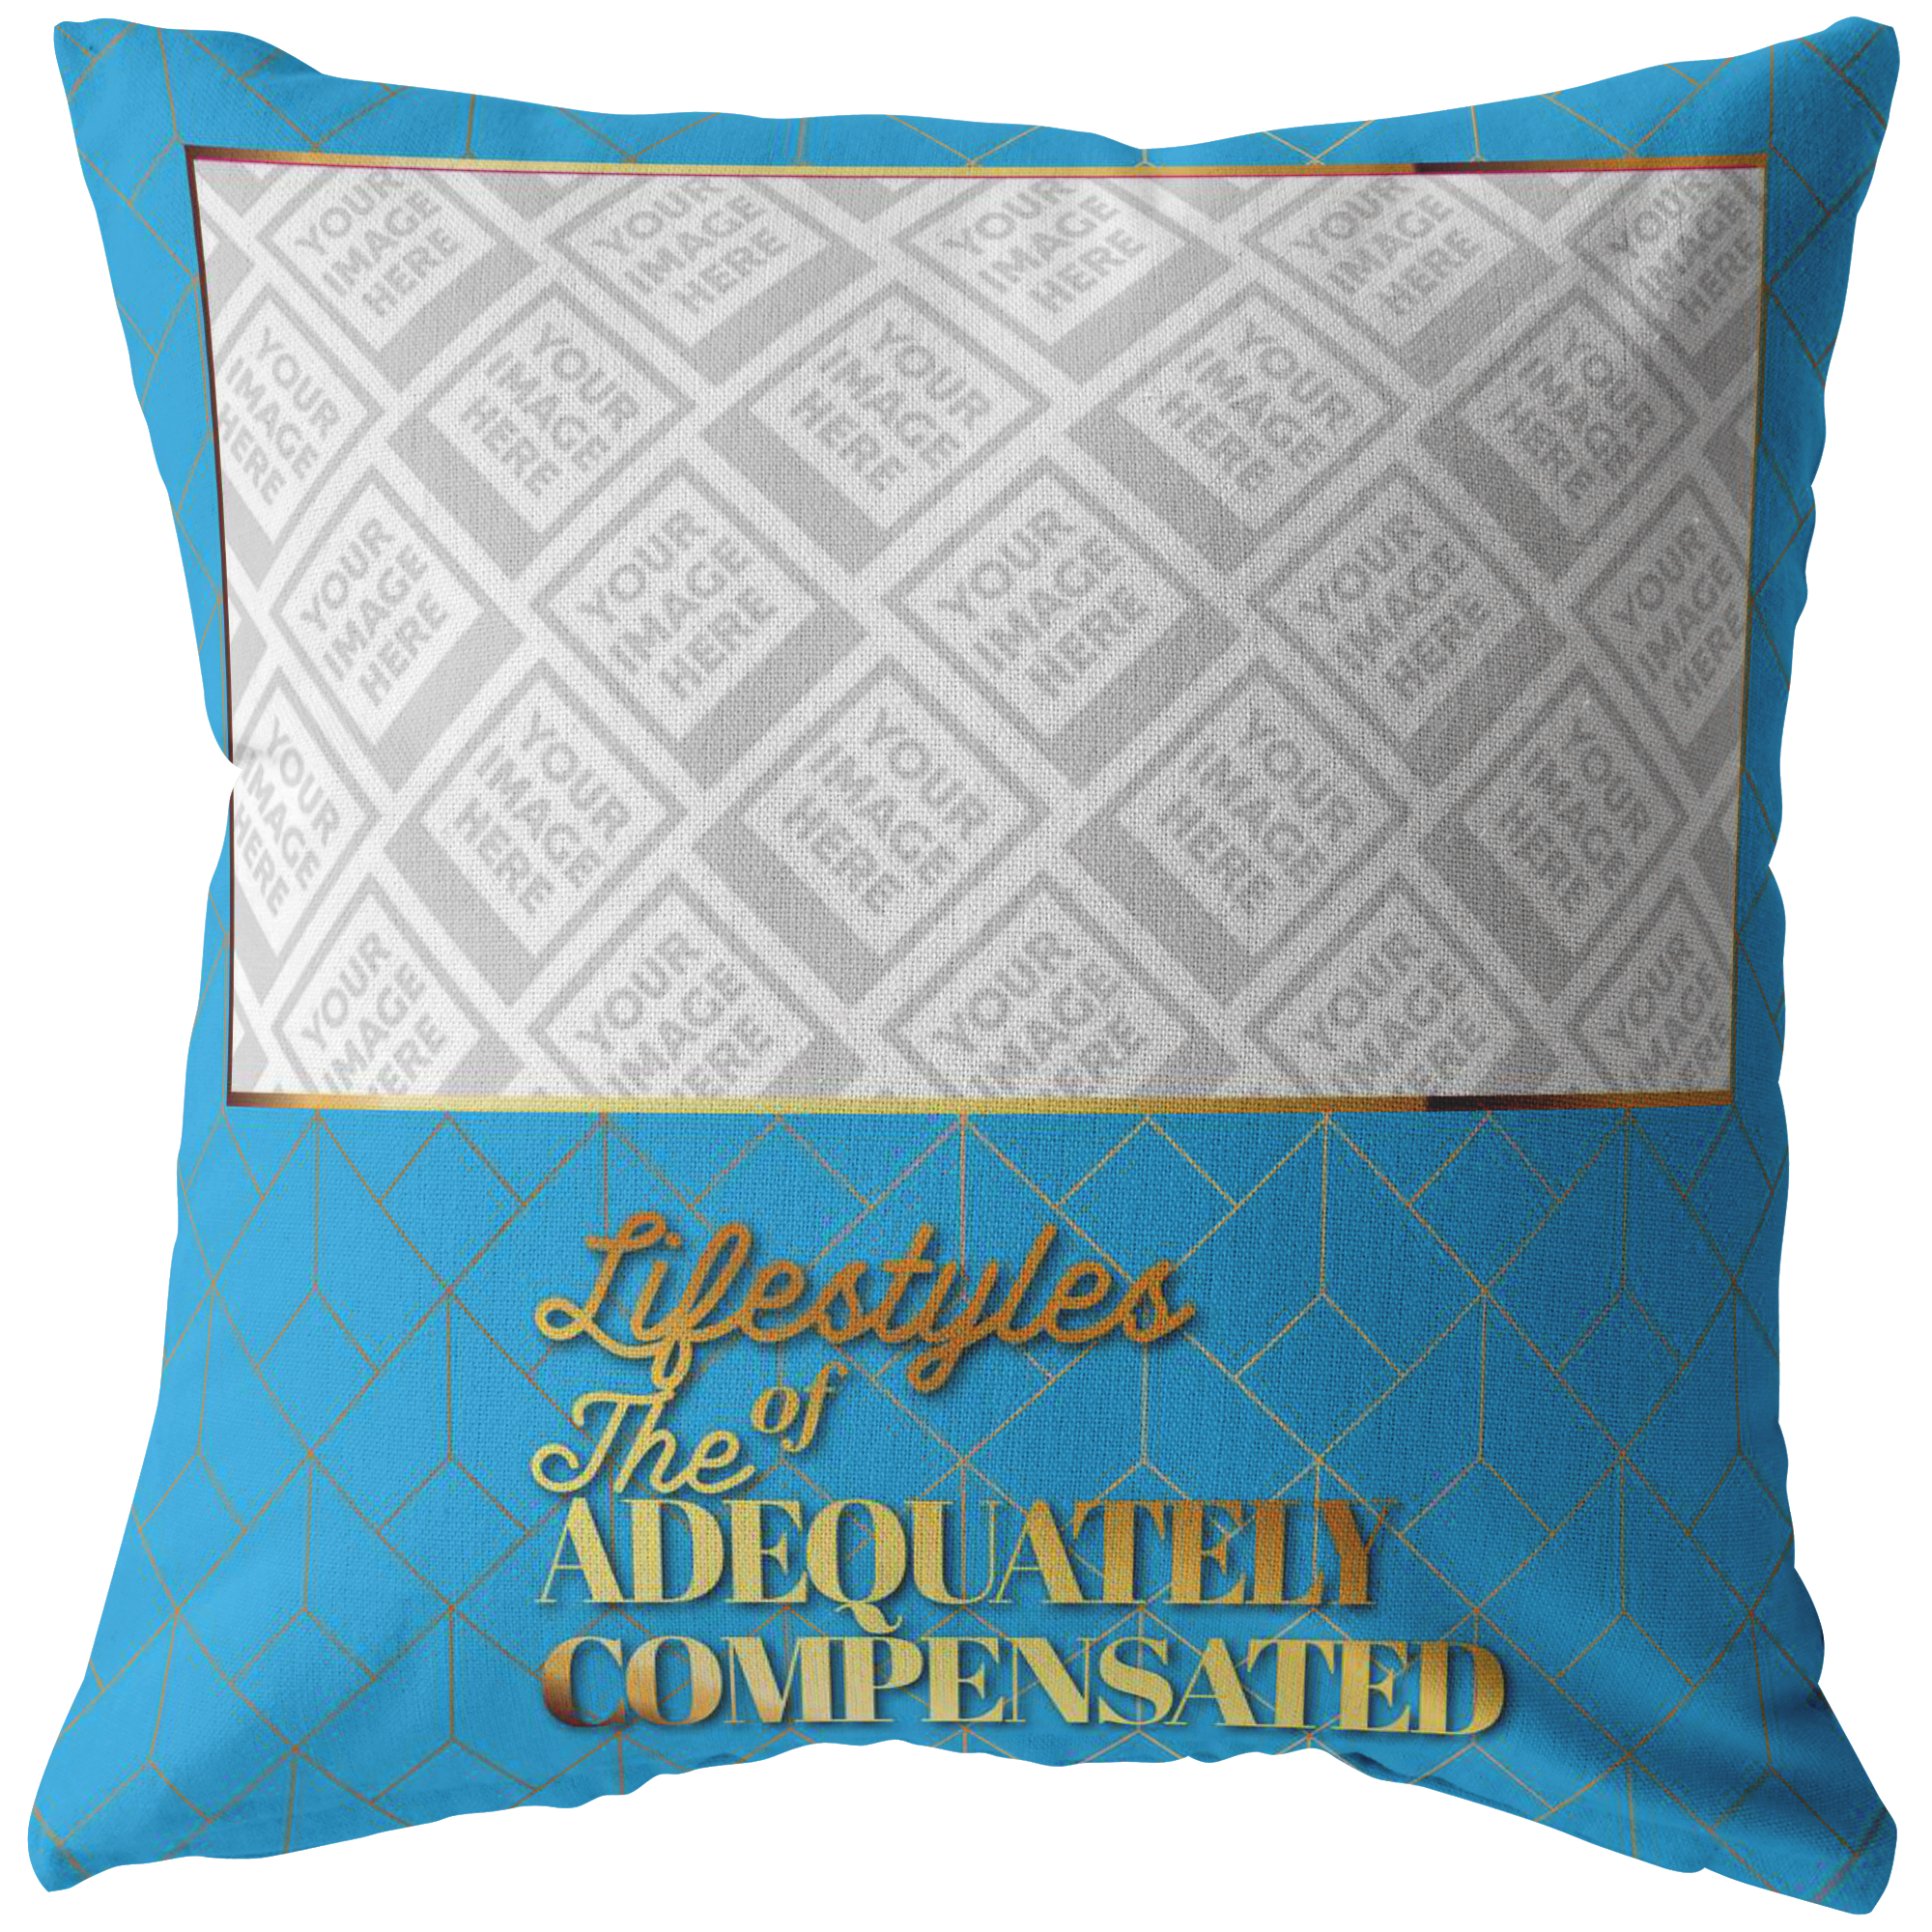 PERSONALIZED Pillow - "Lifestyles of the Adequately Compensated" - Powderaddicts